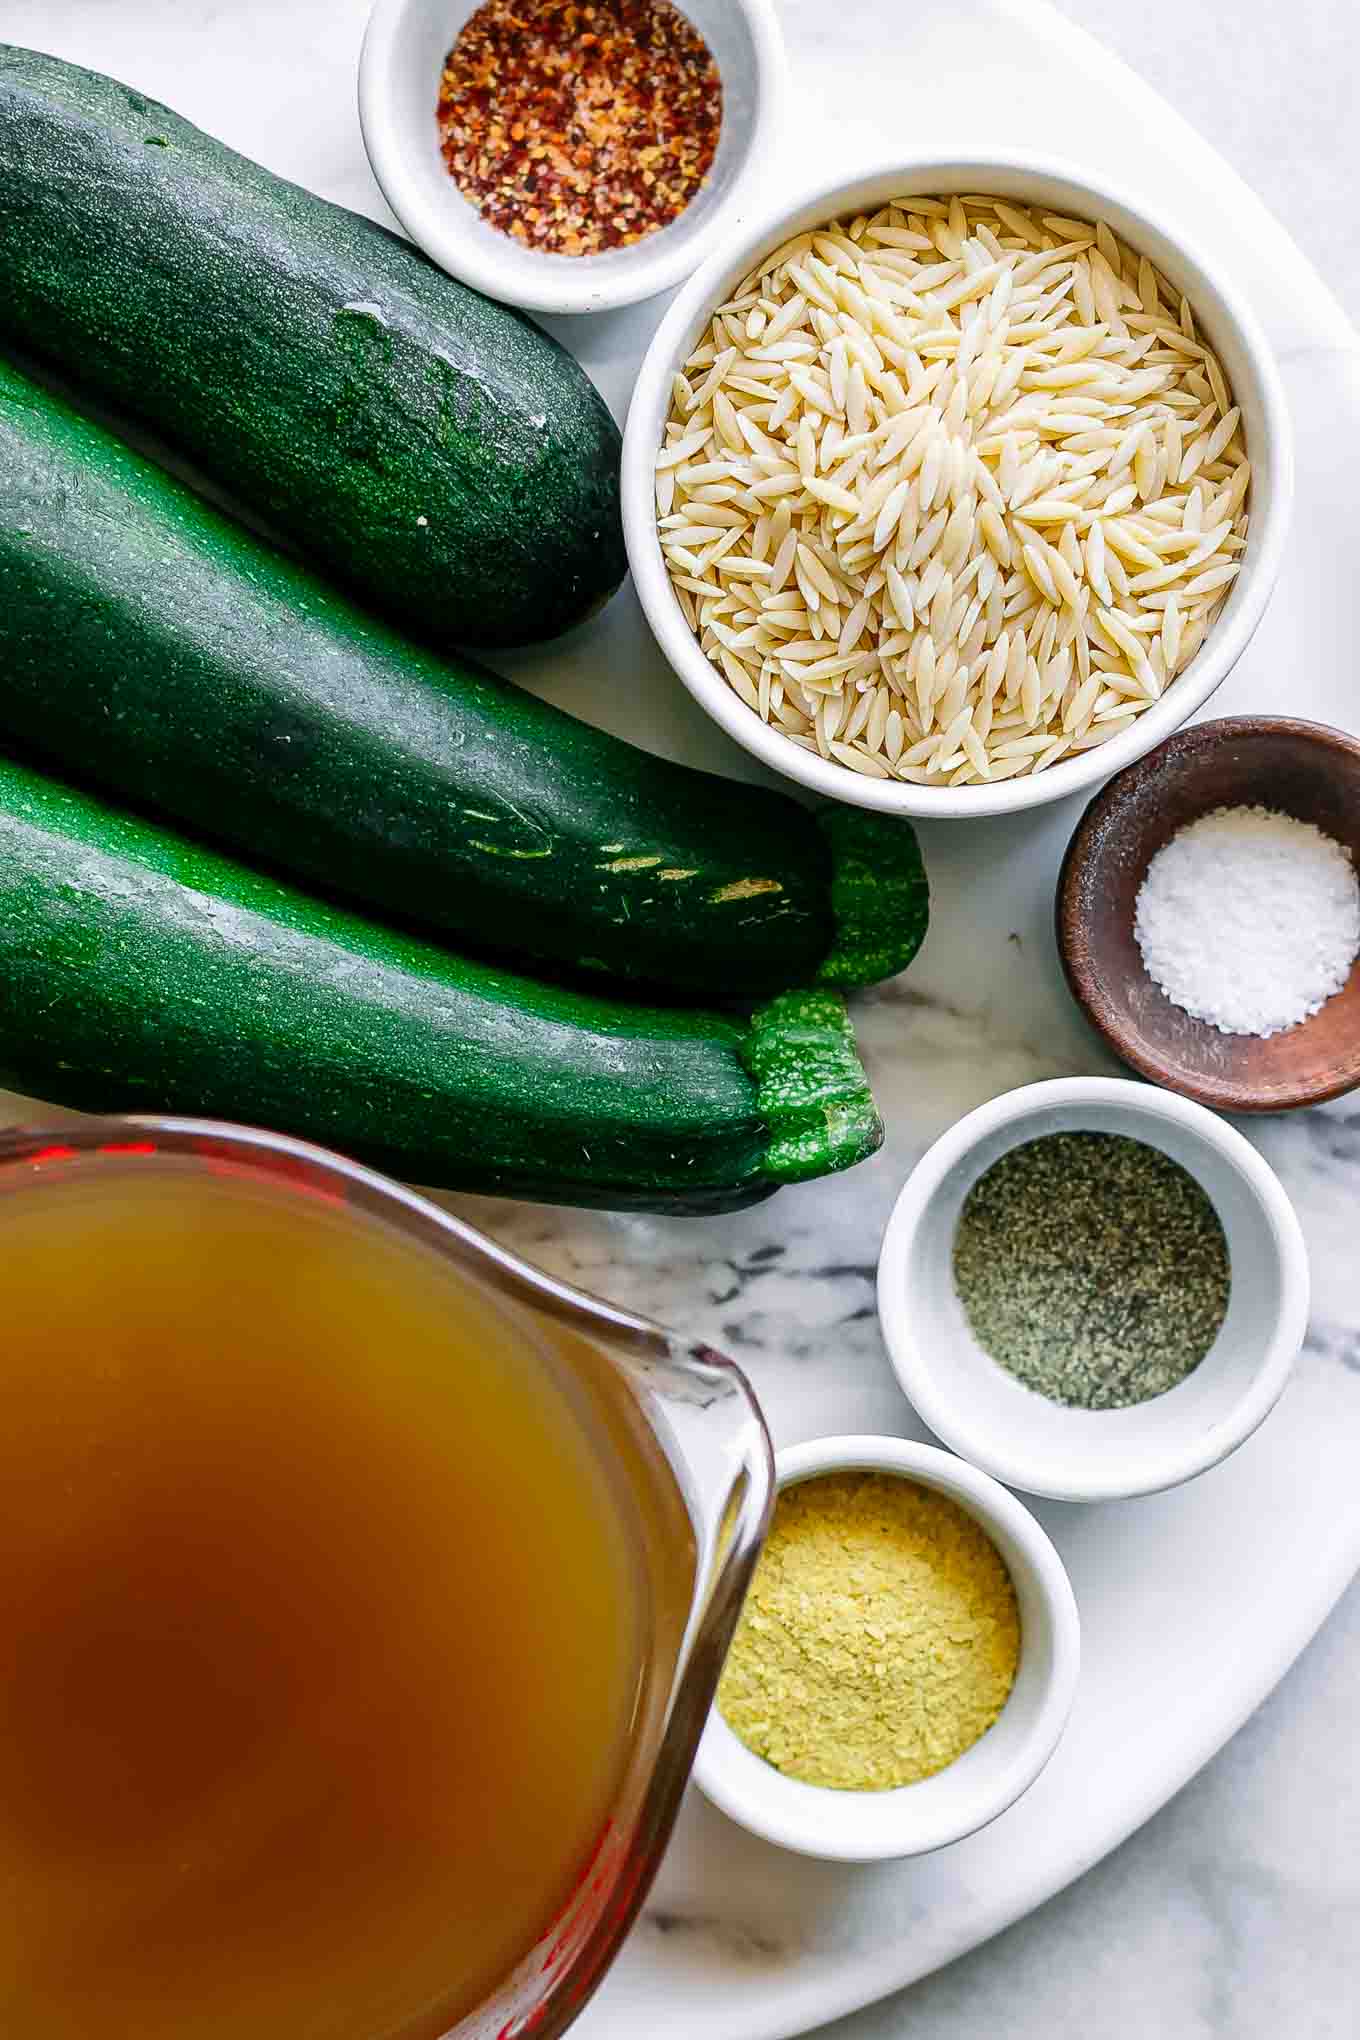 zucchini, orzo pasta, vegetable broth, and seasonings on a white table for orzotto pasta